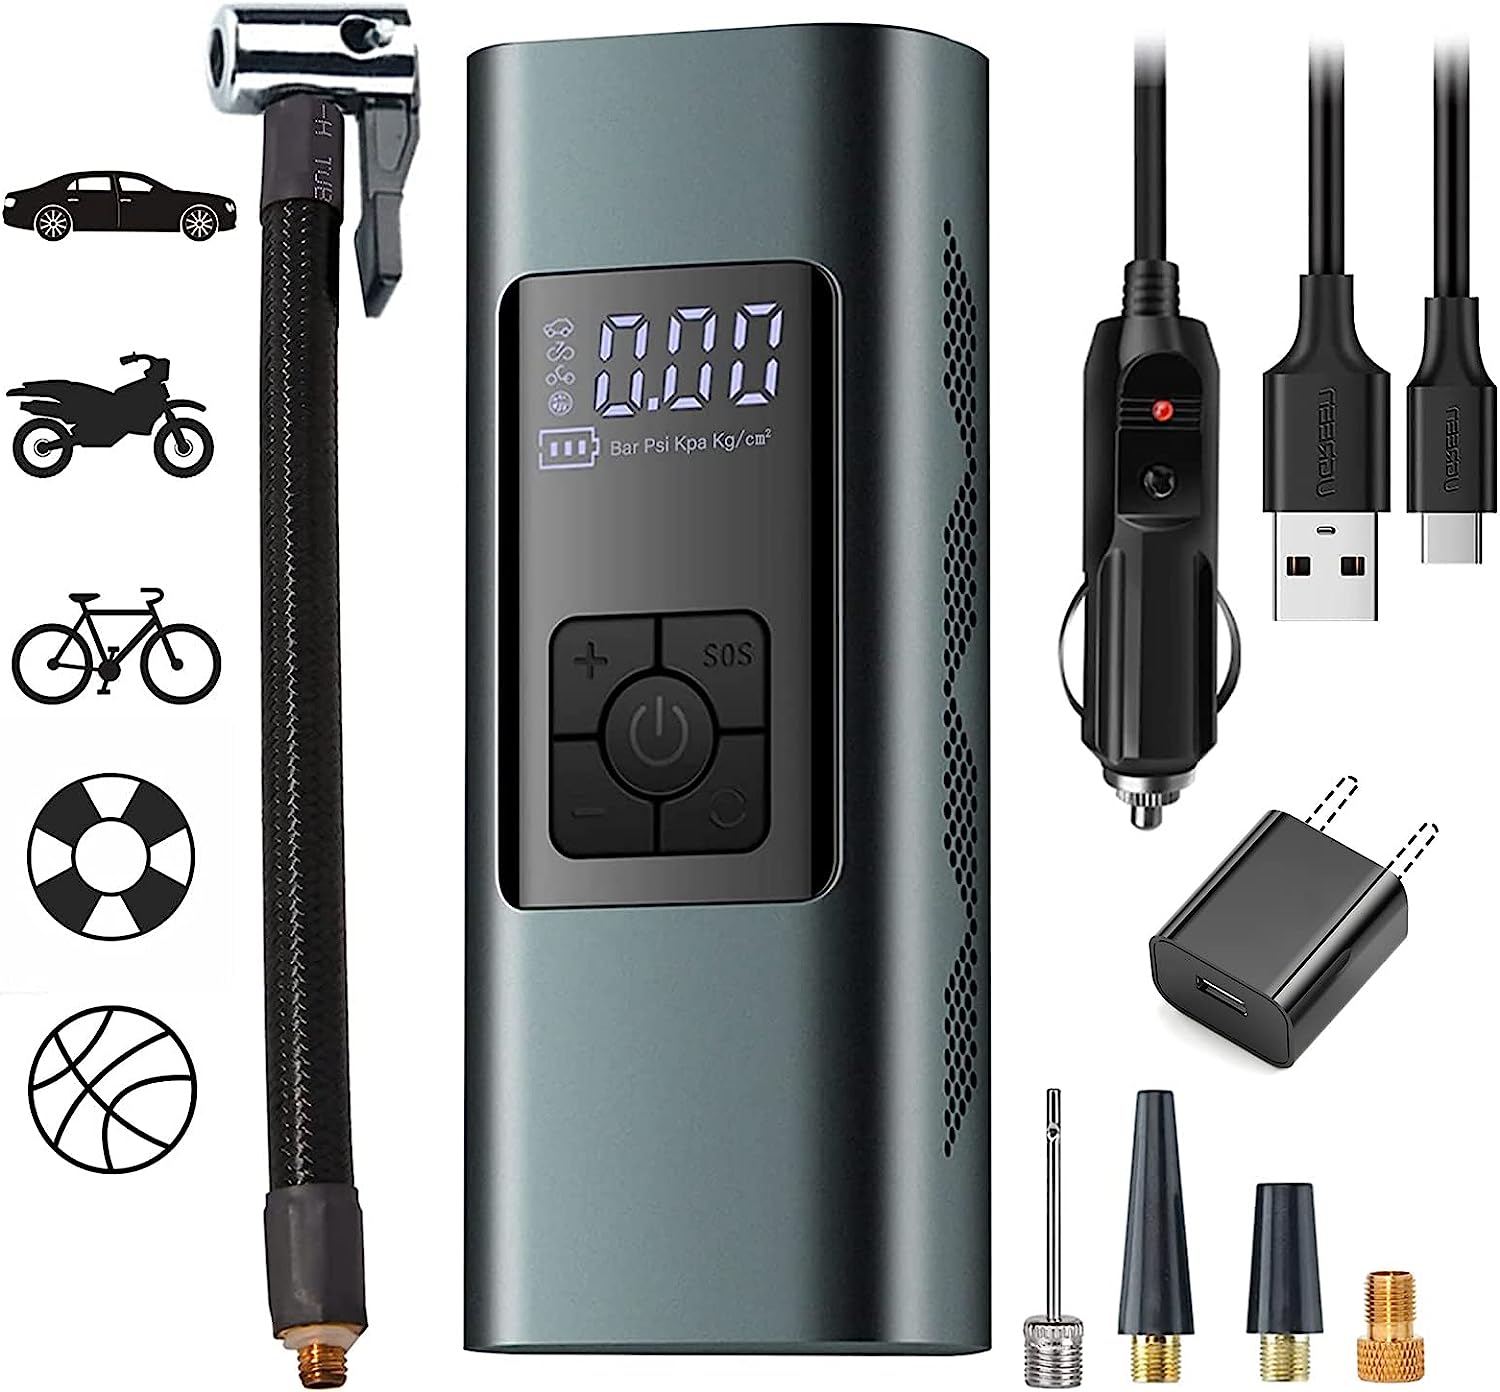 Tyre Inflator Portable Air Compressor, Cordless 6000mAh Backpack